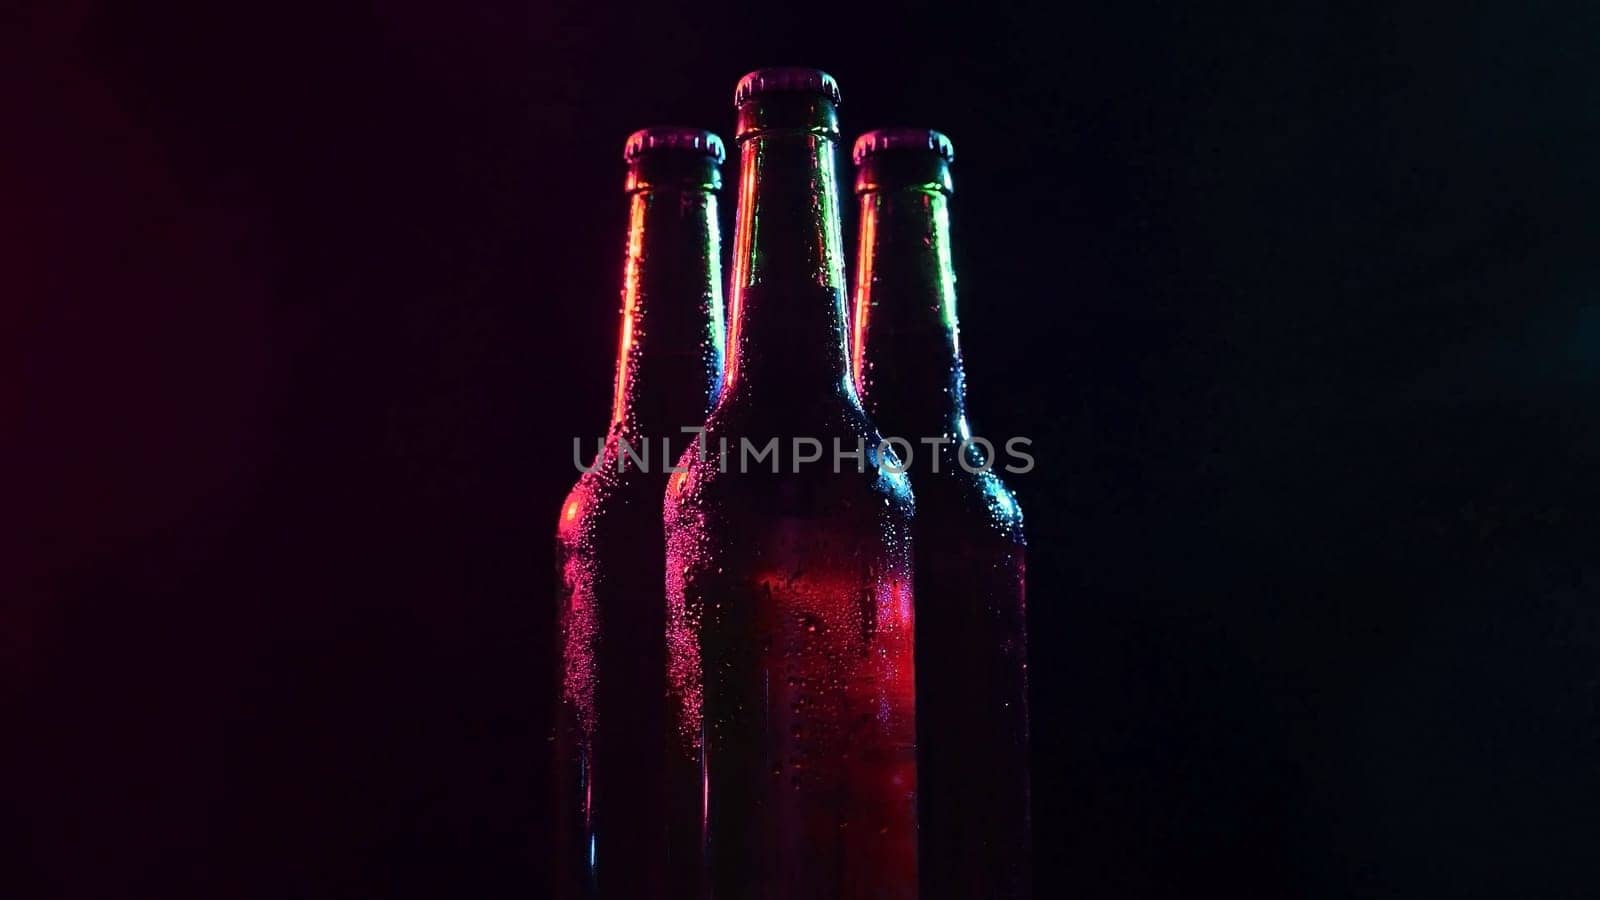 Three bottles of beer spinning in colored light on a black background. by mrwed54